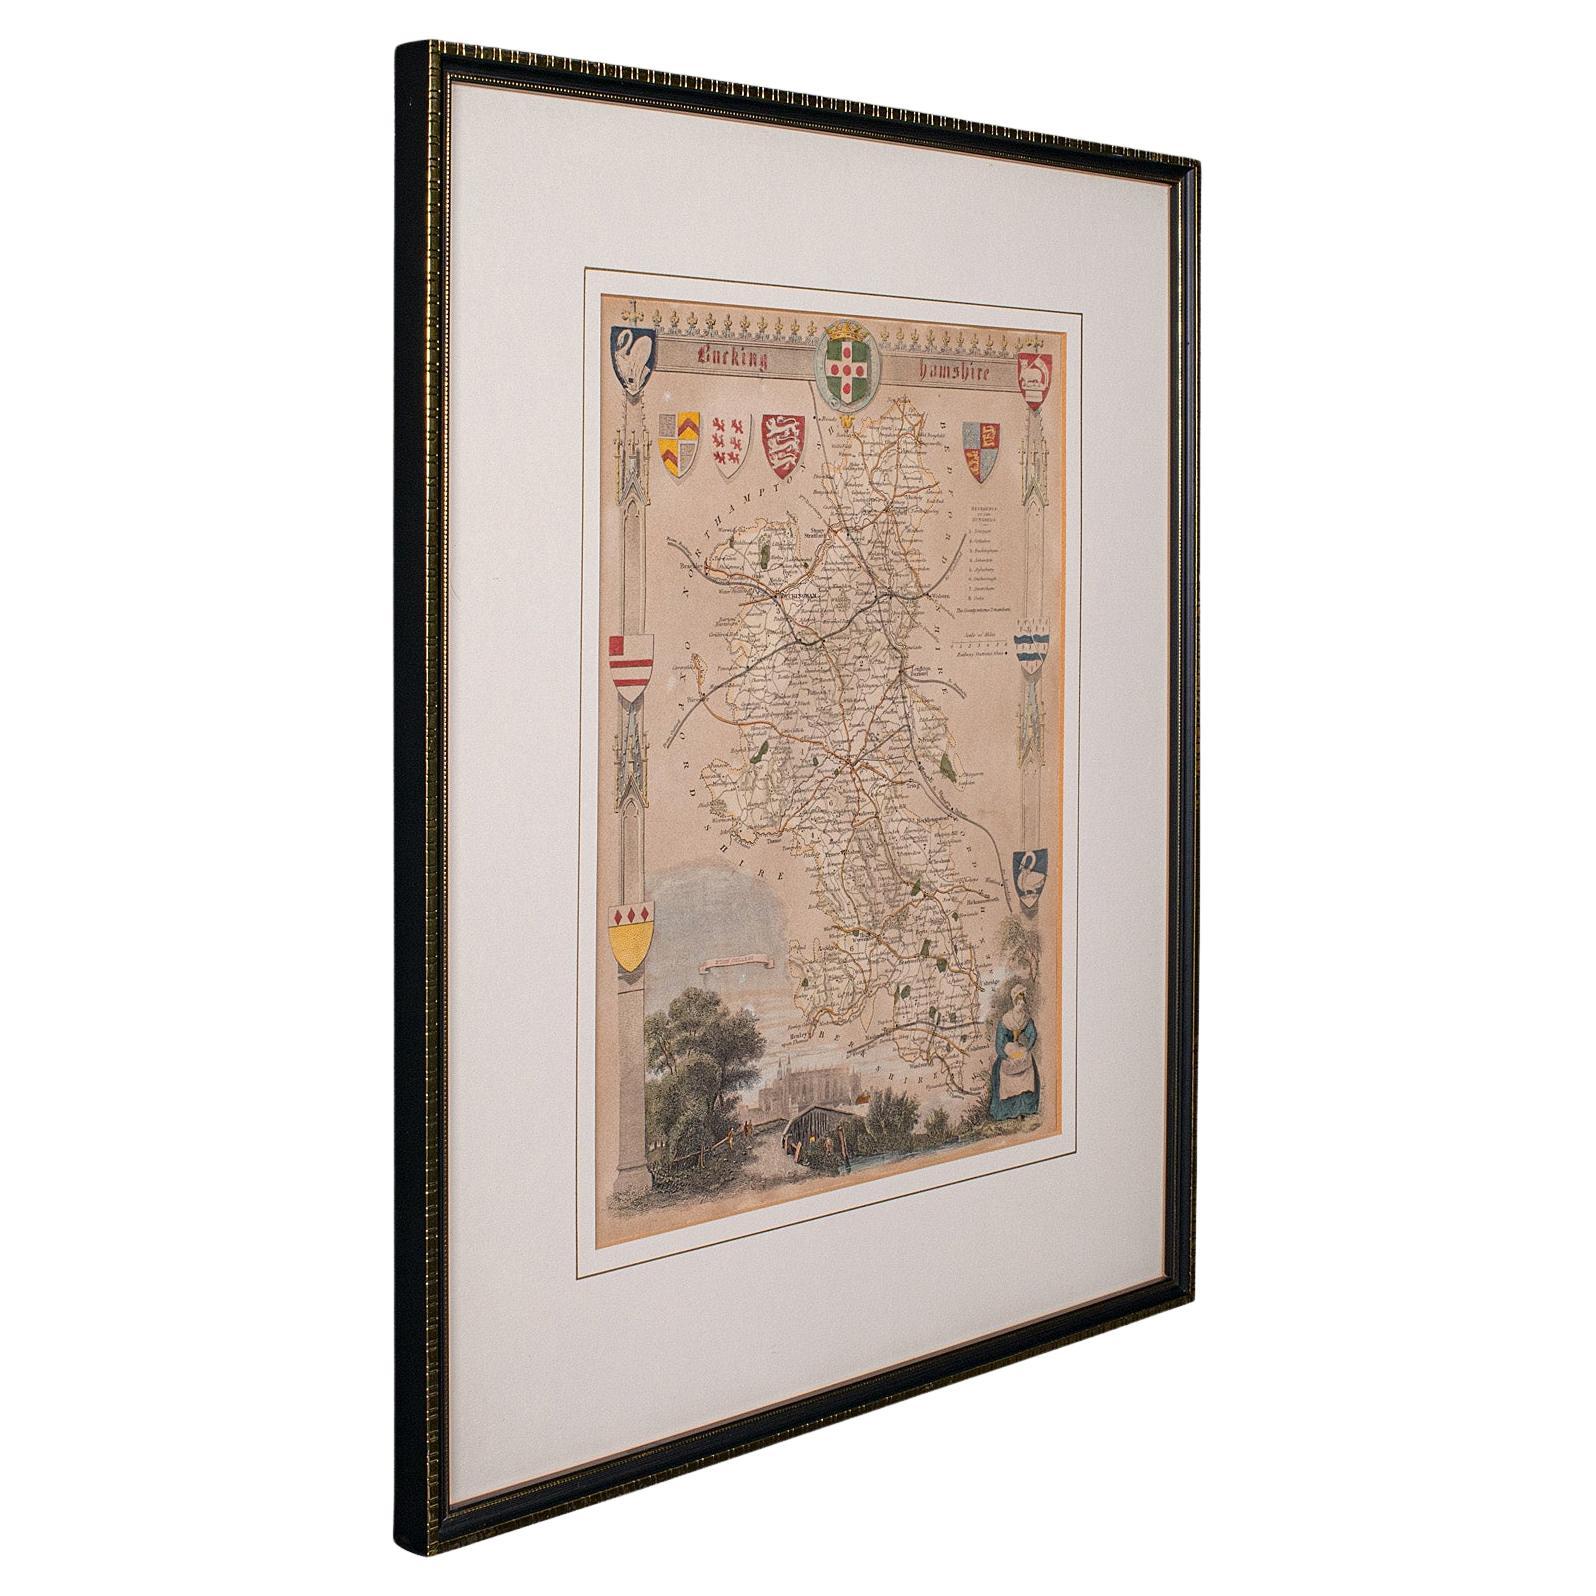 Antique Lithography Map, Buckinghamshire, English, Framed Cartography, Victorian For Sale